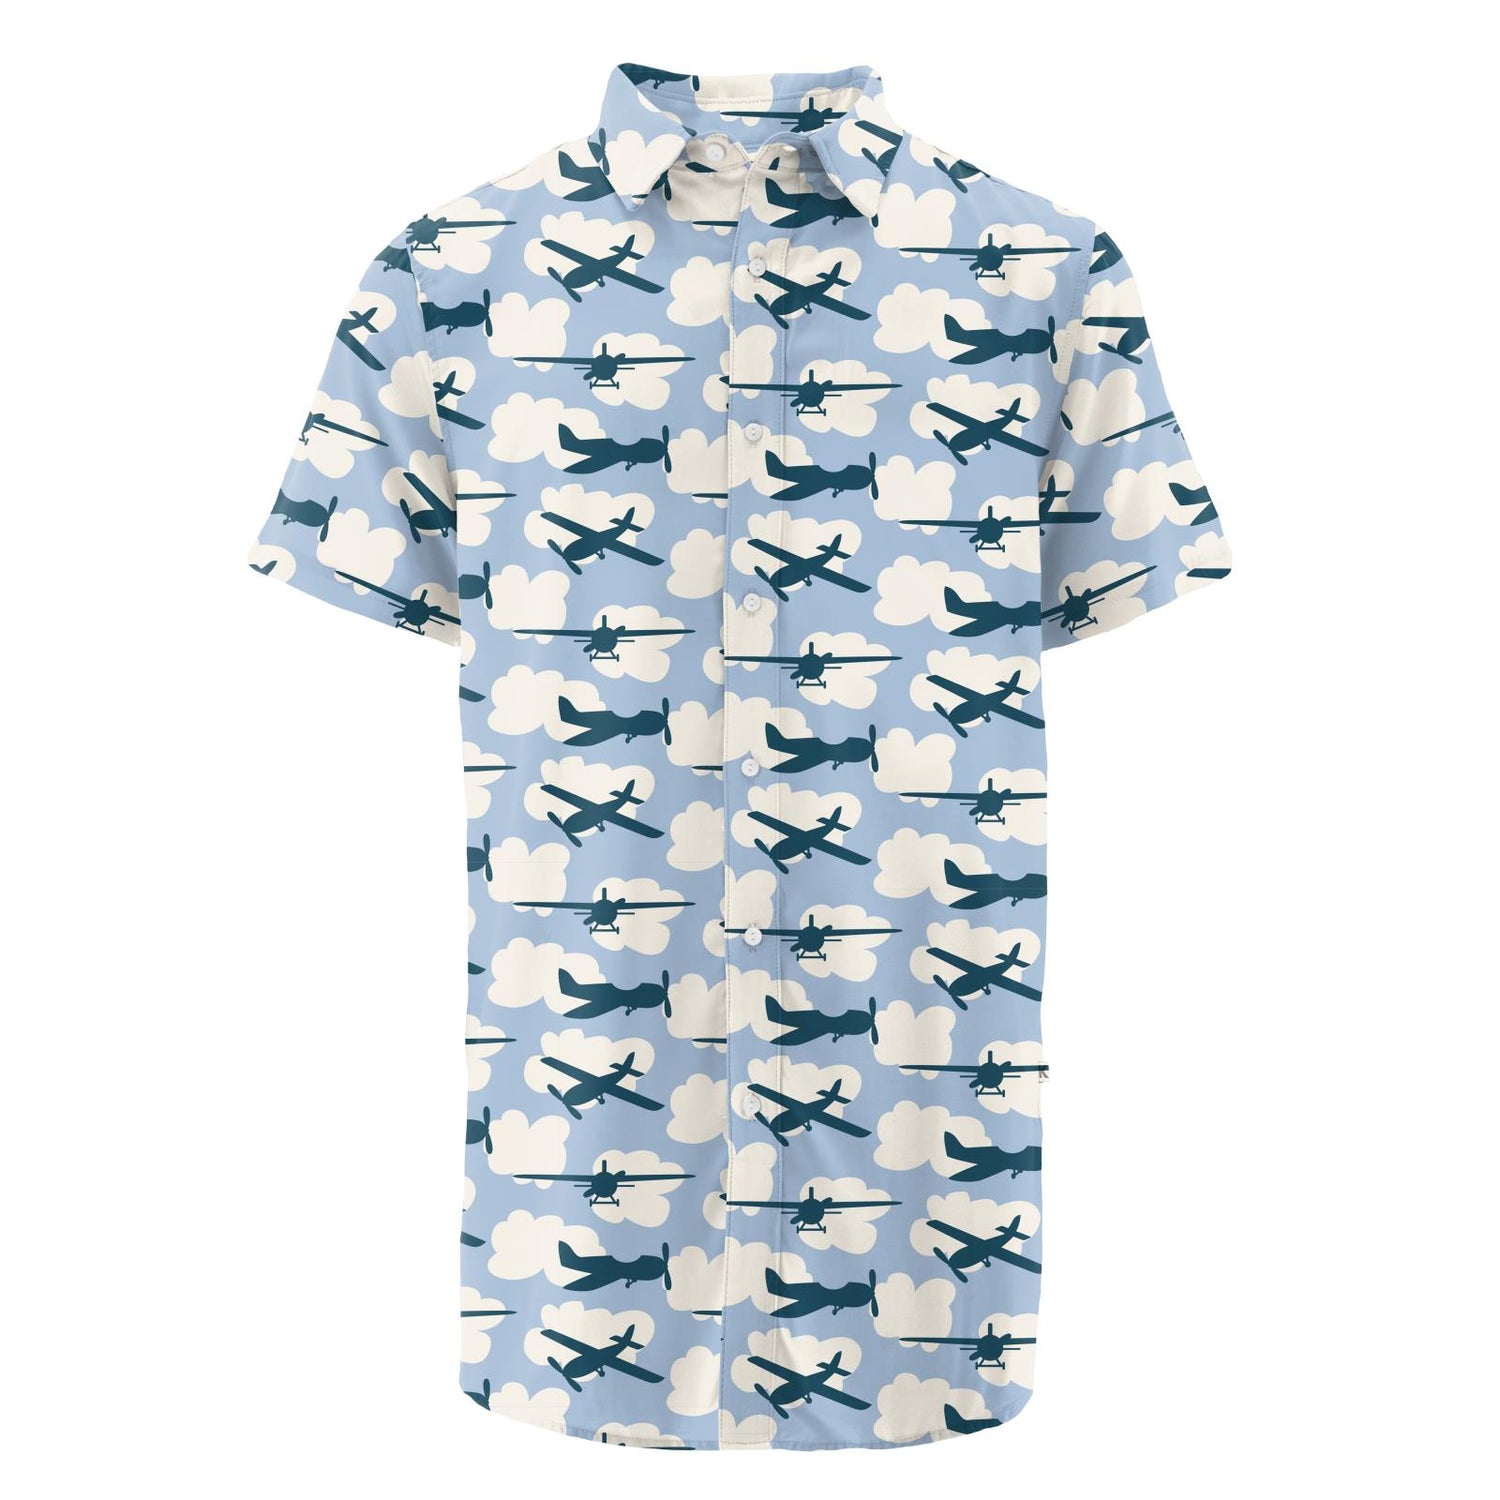 Men's Print Short Sleeve Woven Button Down Shirt in Pond Planes